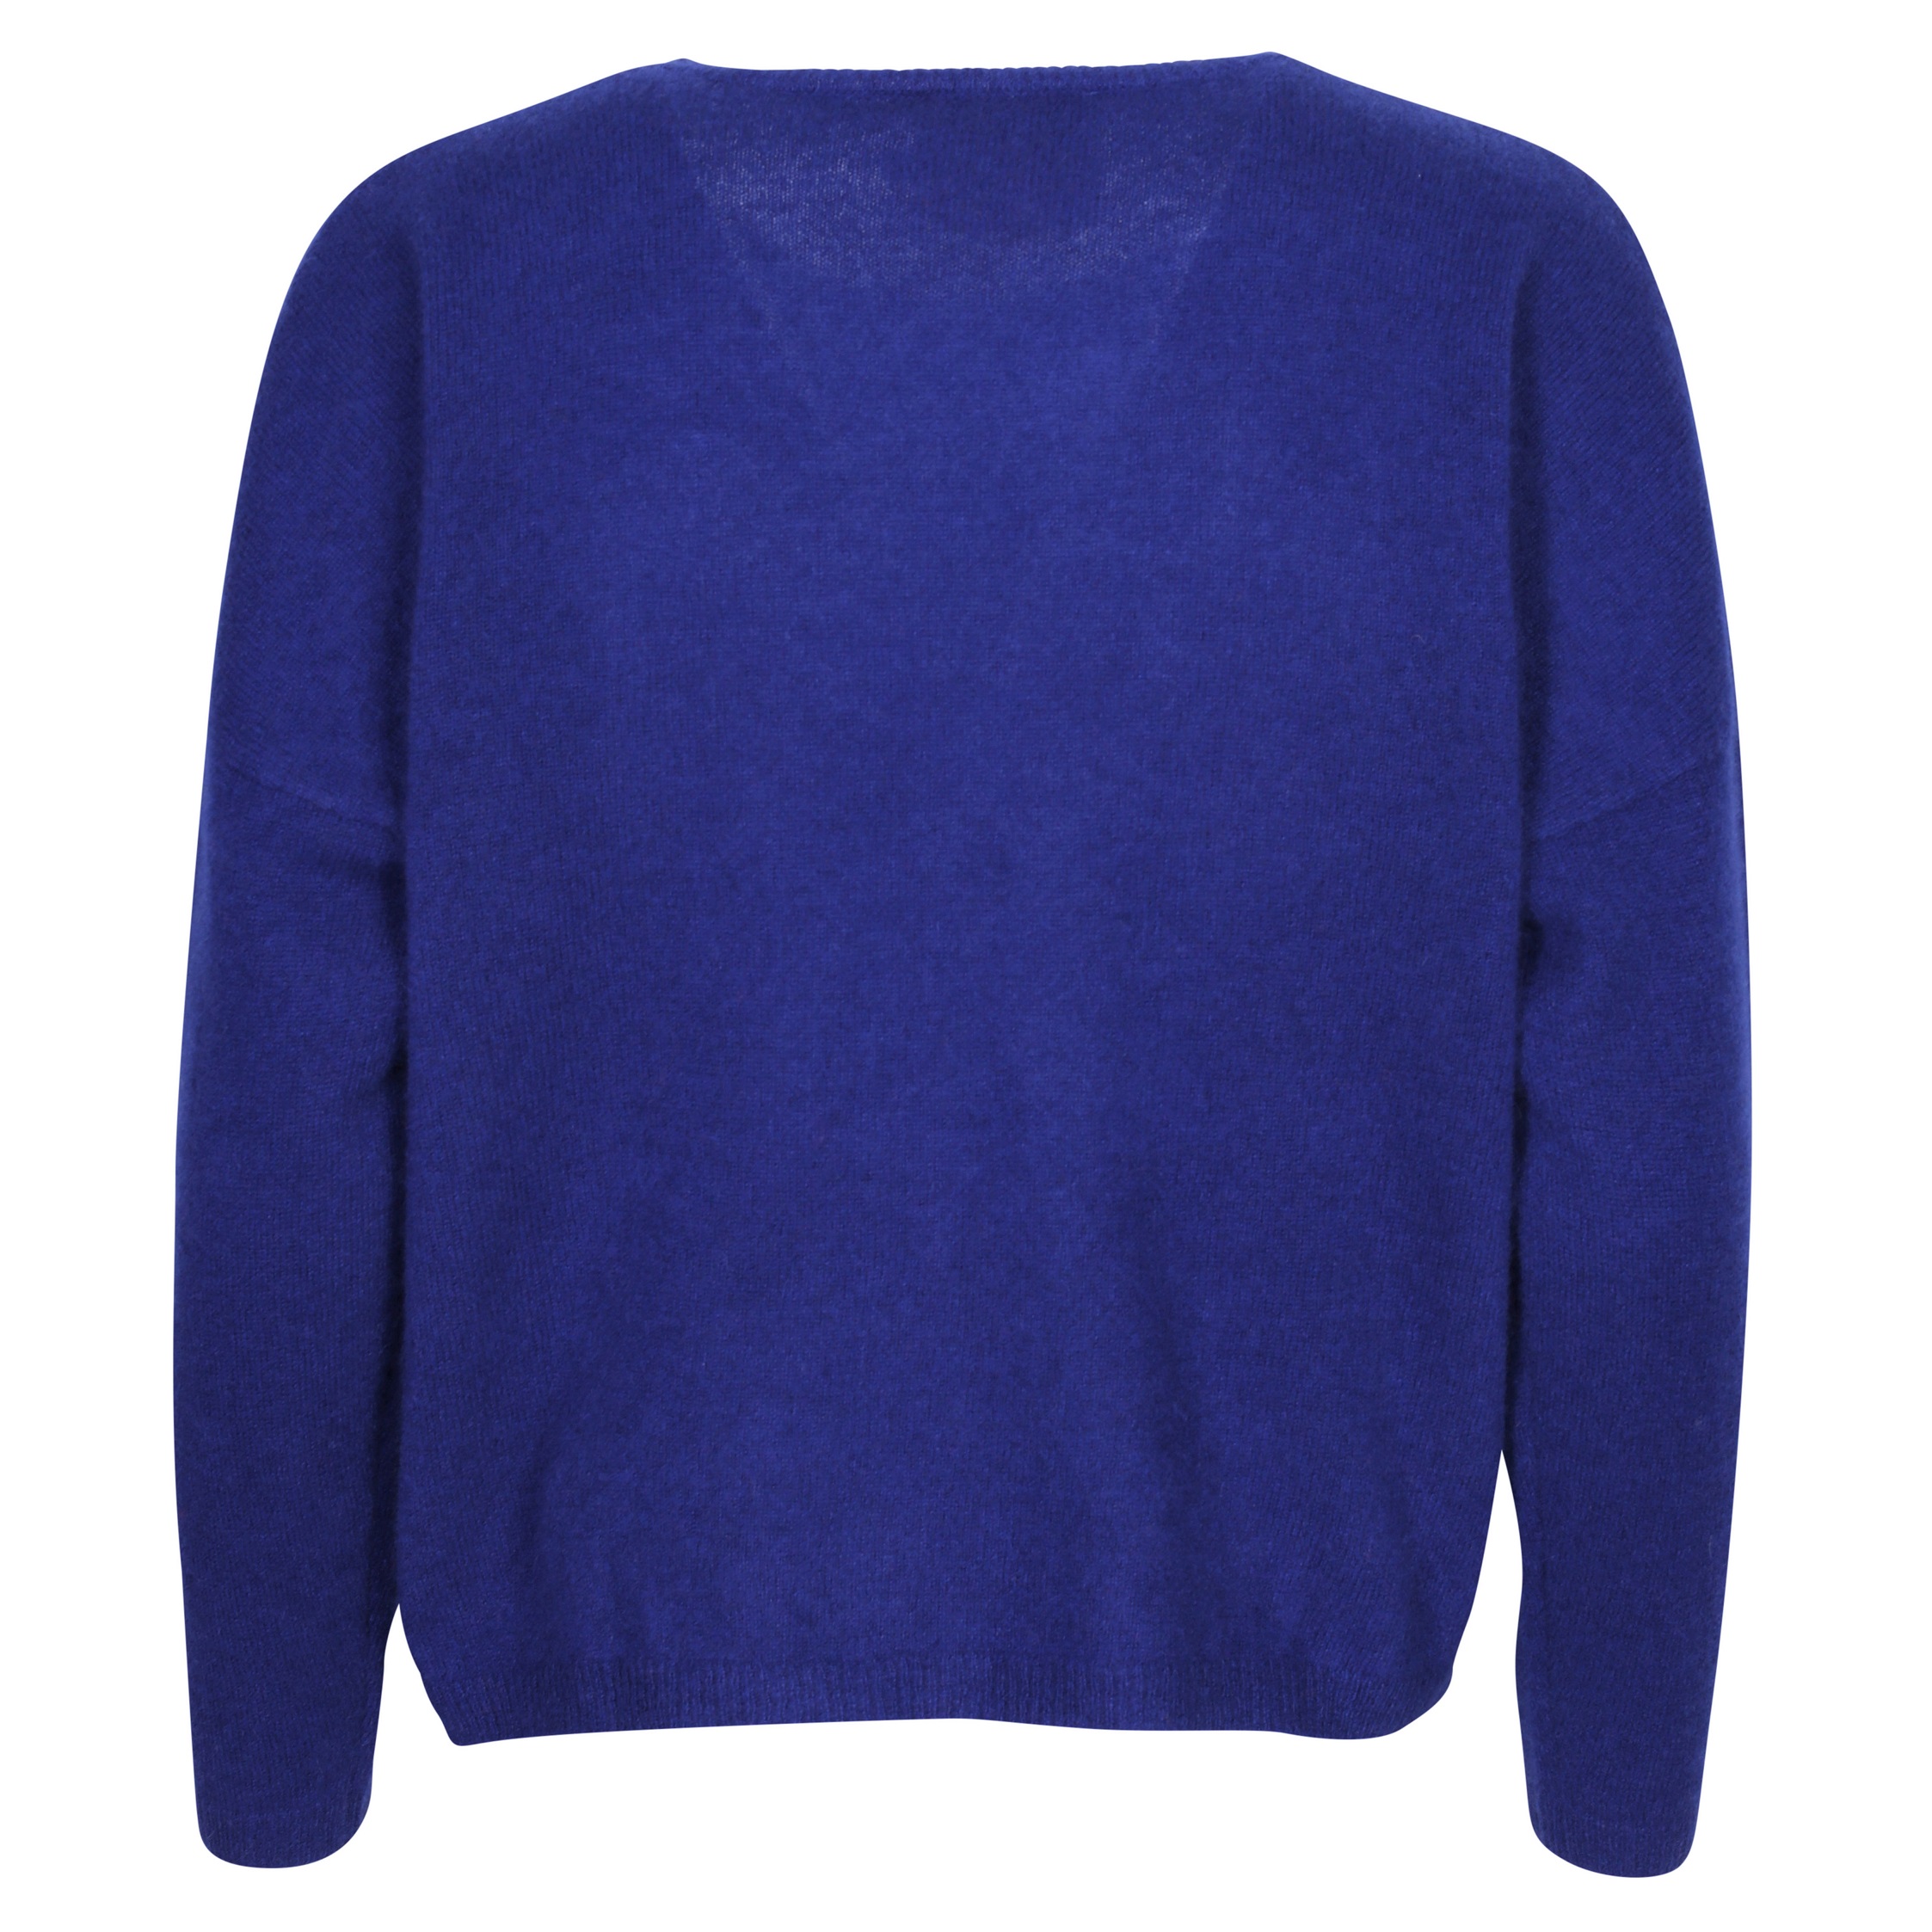 Absolut Cashmere Kaira Cashmere Pullover in Outremer